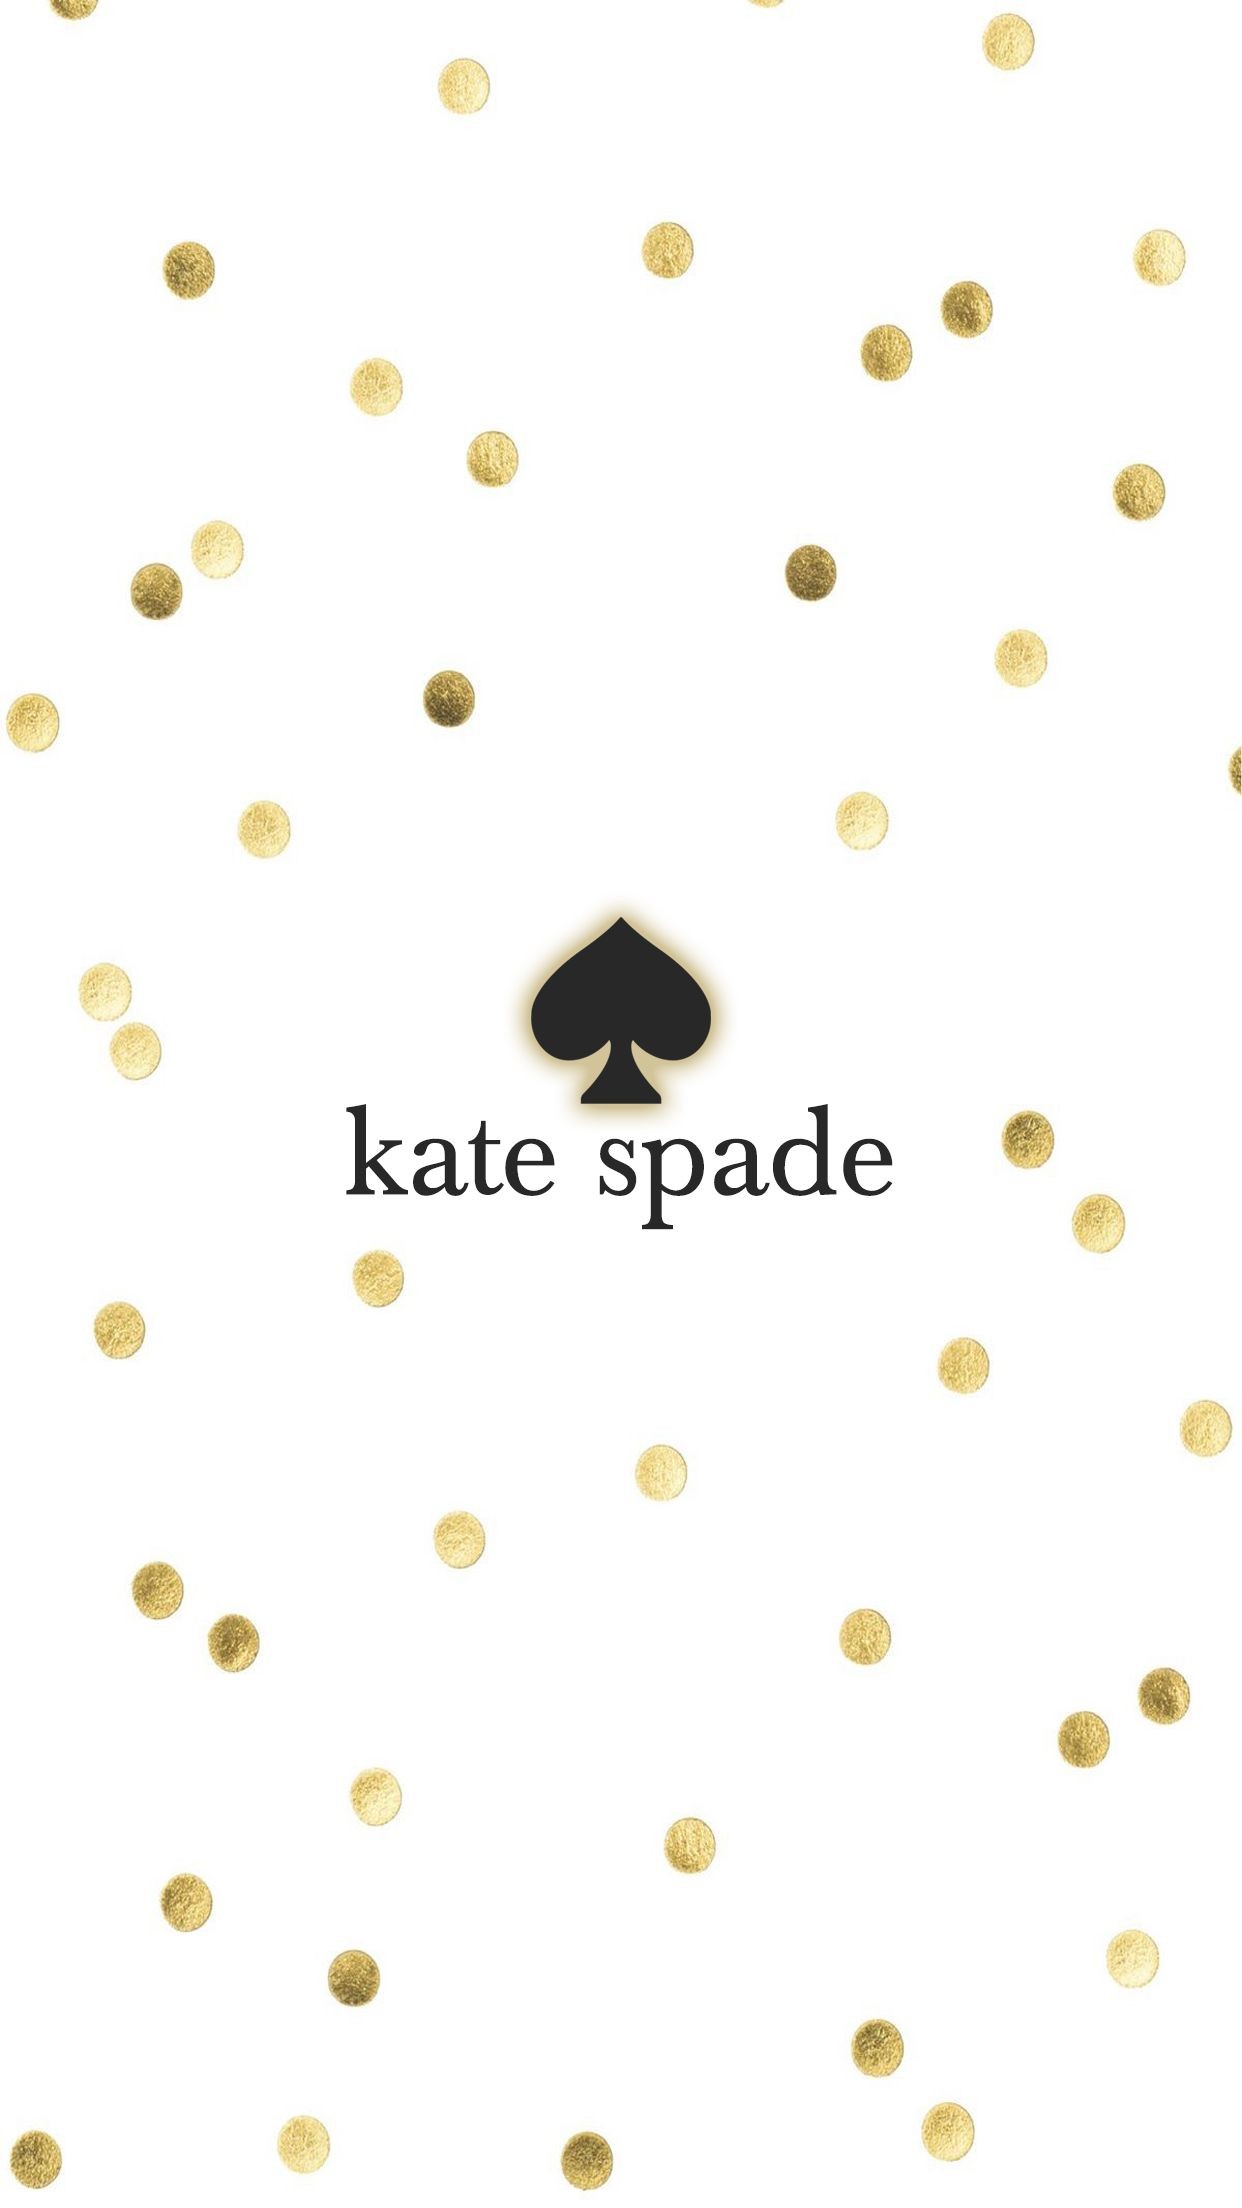 Kate Spade Gold Iphone Wallpaper Background 1242x2208